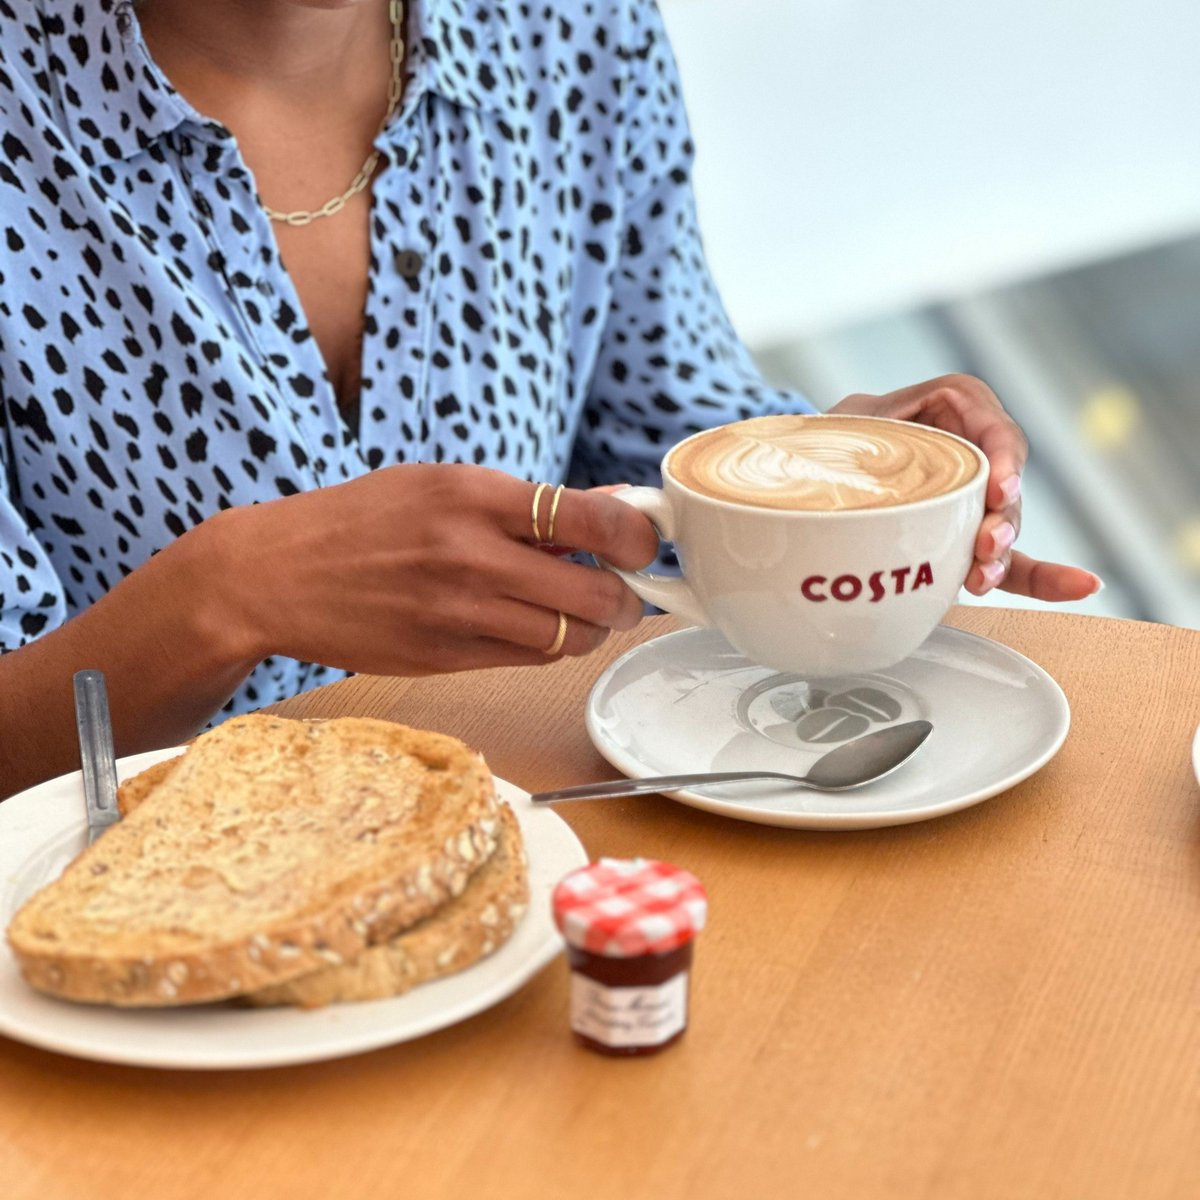 Your favourite coffee & toast is always a good idea. 😋 Head to @costacoffee to treat yourself this week. 💙
#costacoffee #costahavant #treatyourself #tealovers #havantmums #MeridianShoppingCentre #ShopMeridian #Havant #EastHants #EastHampshire #HampshireLife